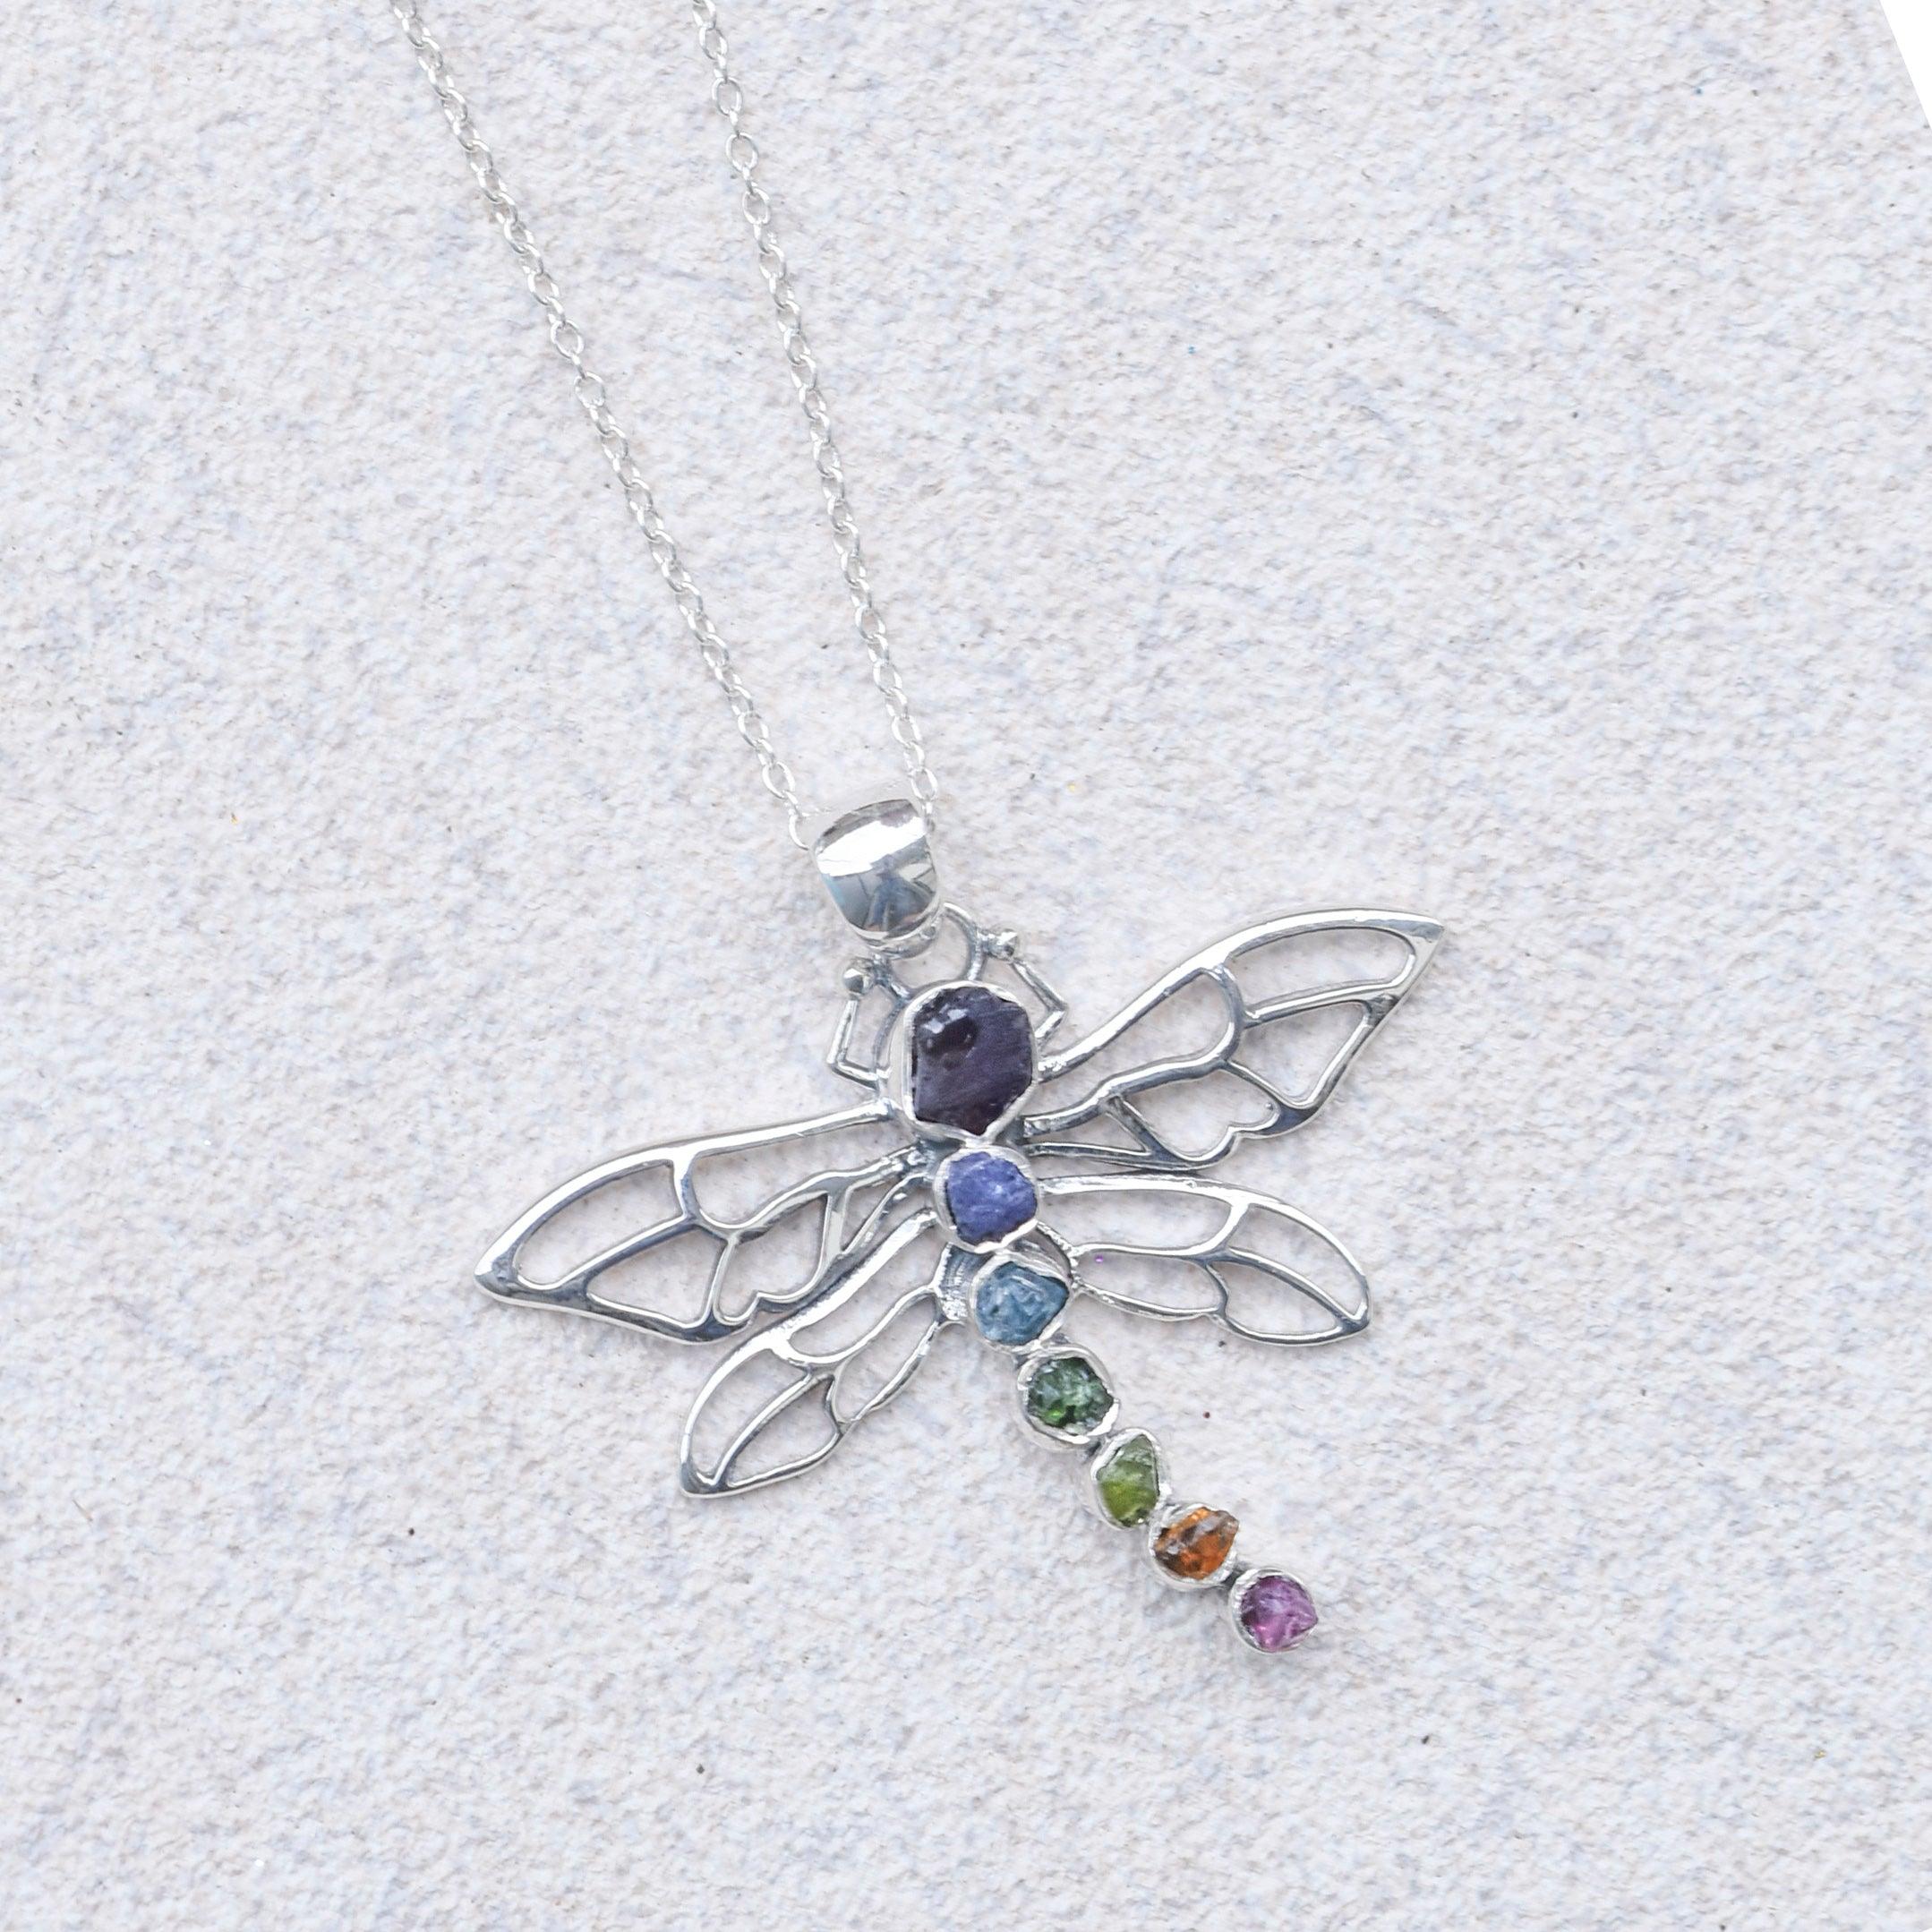 Rough Chakra Healing Stone Solid Sterling Silver Chain Dragonfly Pendant Necklace Jewelry - YoTreasure